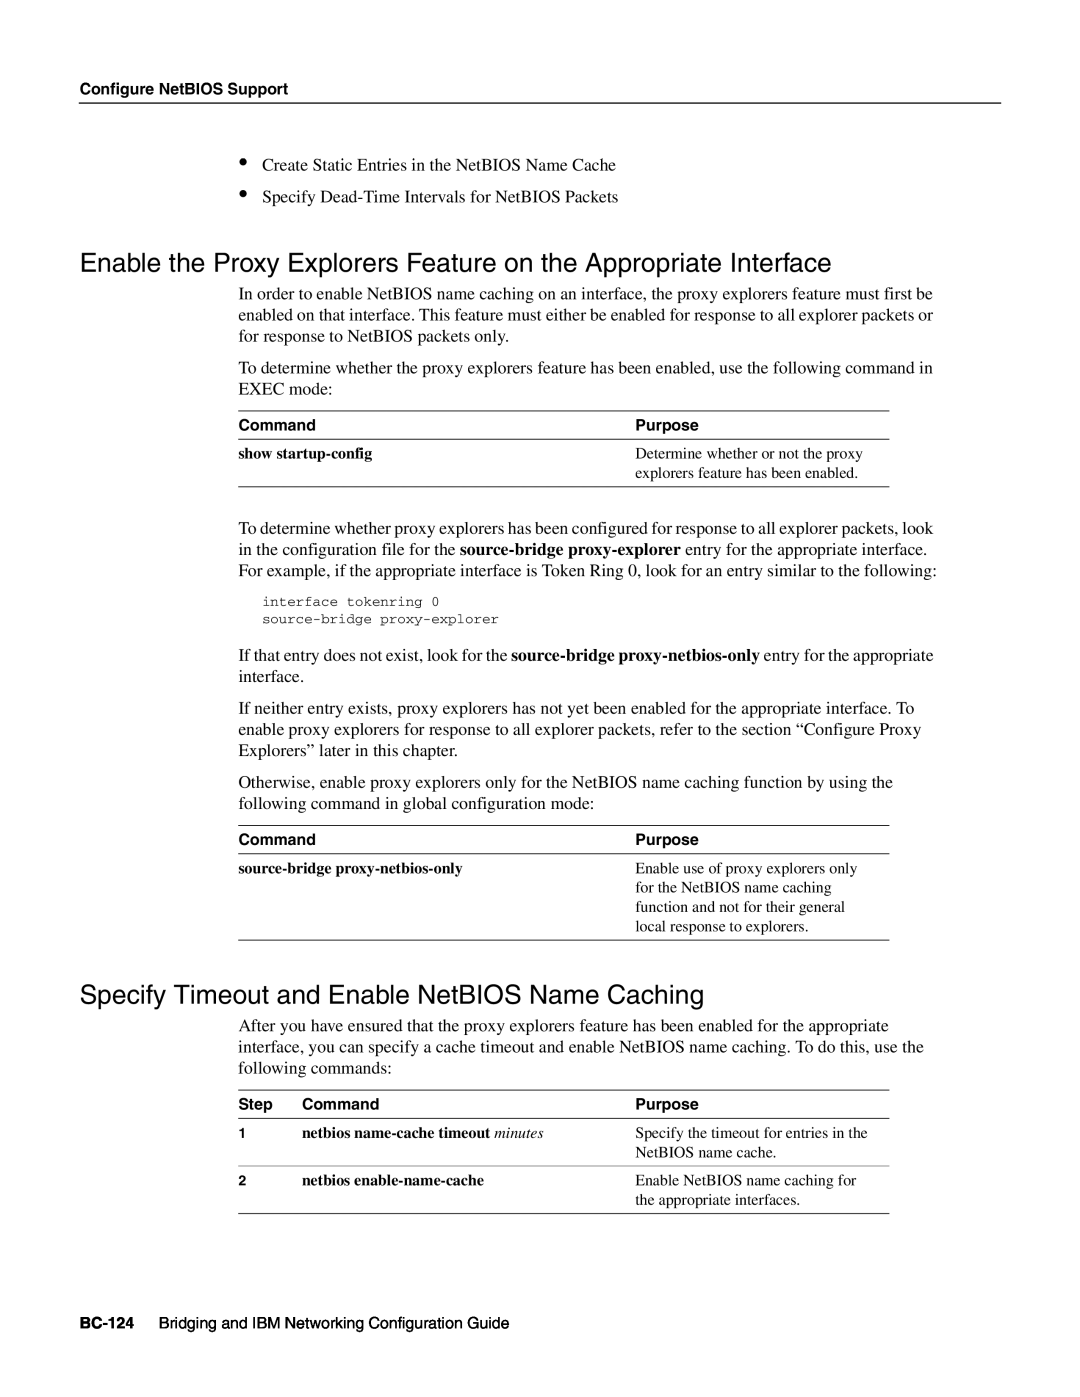 Cisco Systems BC-109 manual Enable the Proxy Explorers Feature on the Appropriate Interface 